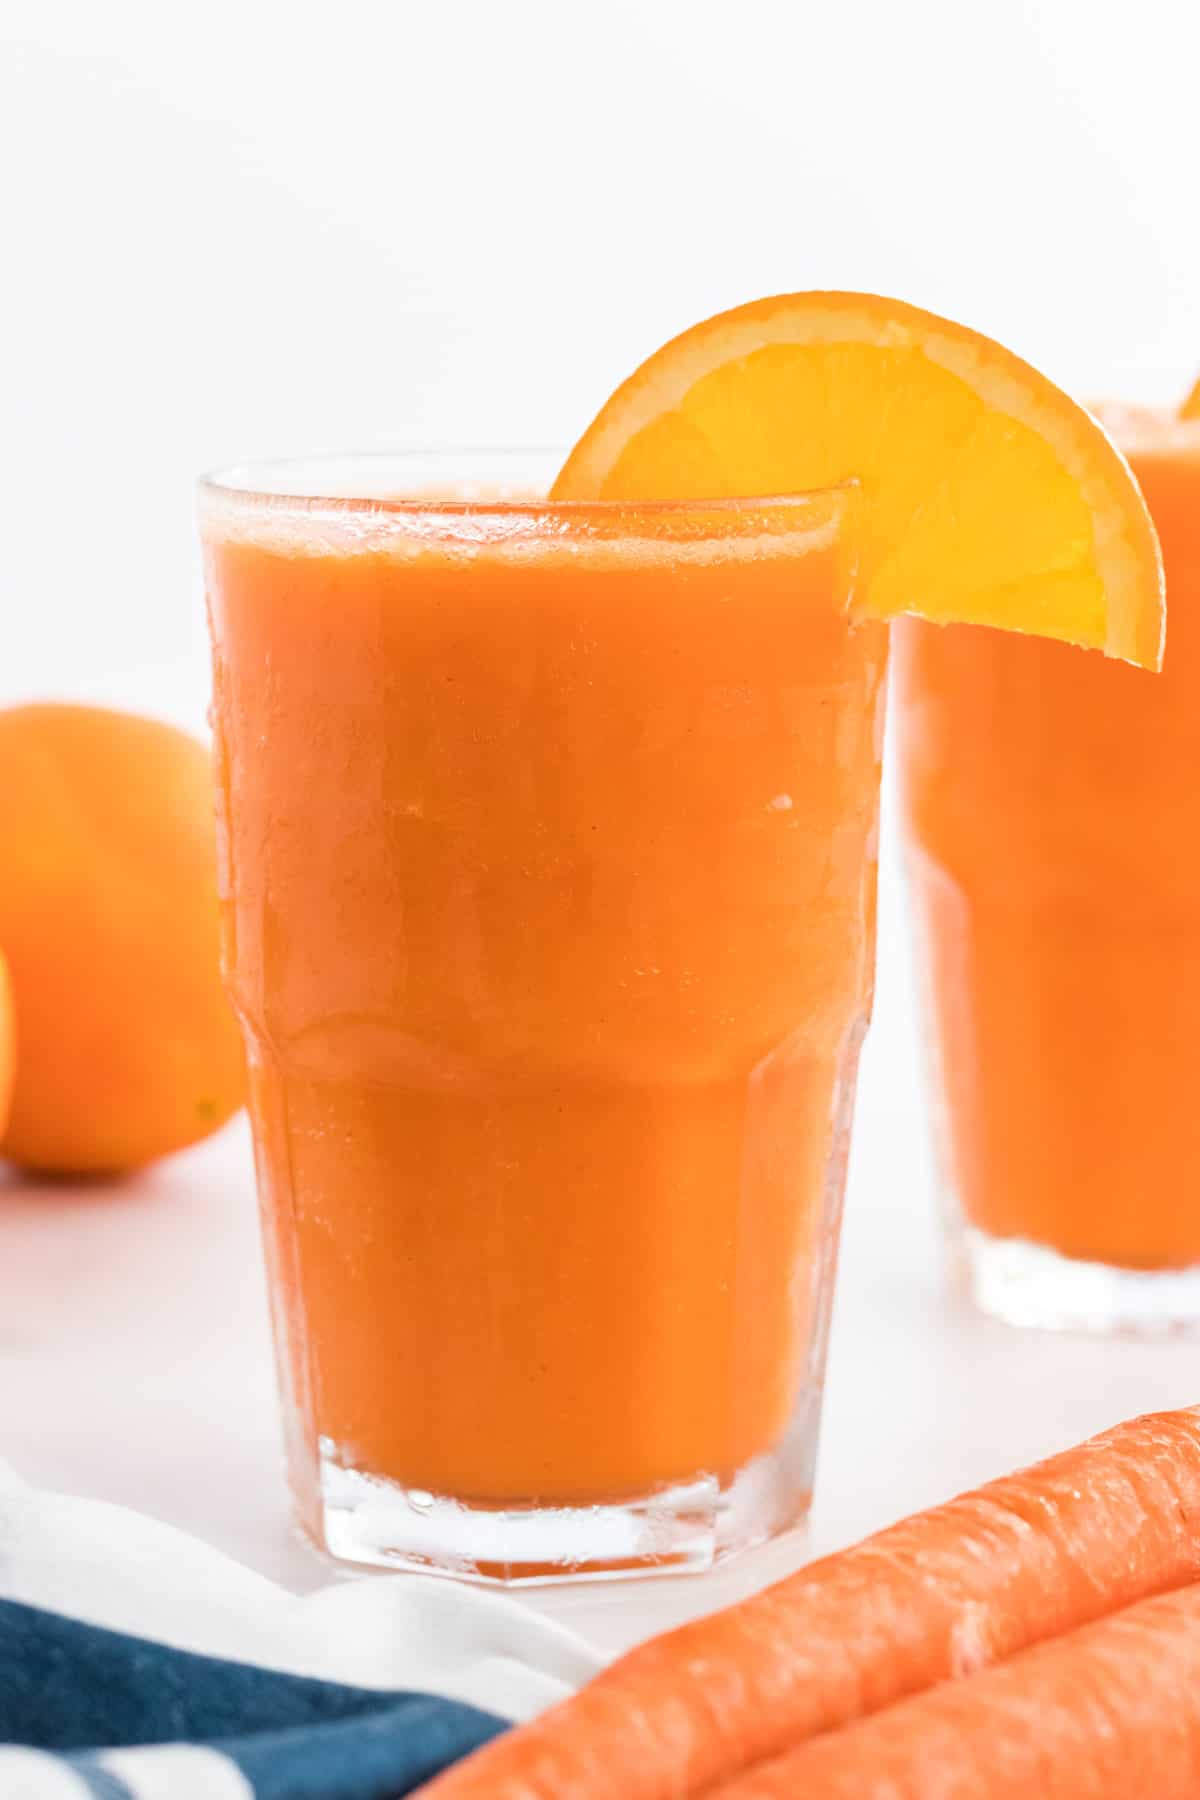 carrot smoothie in a glass with an orange slice on the rim